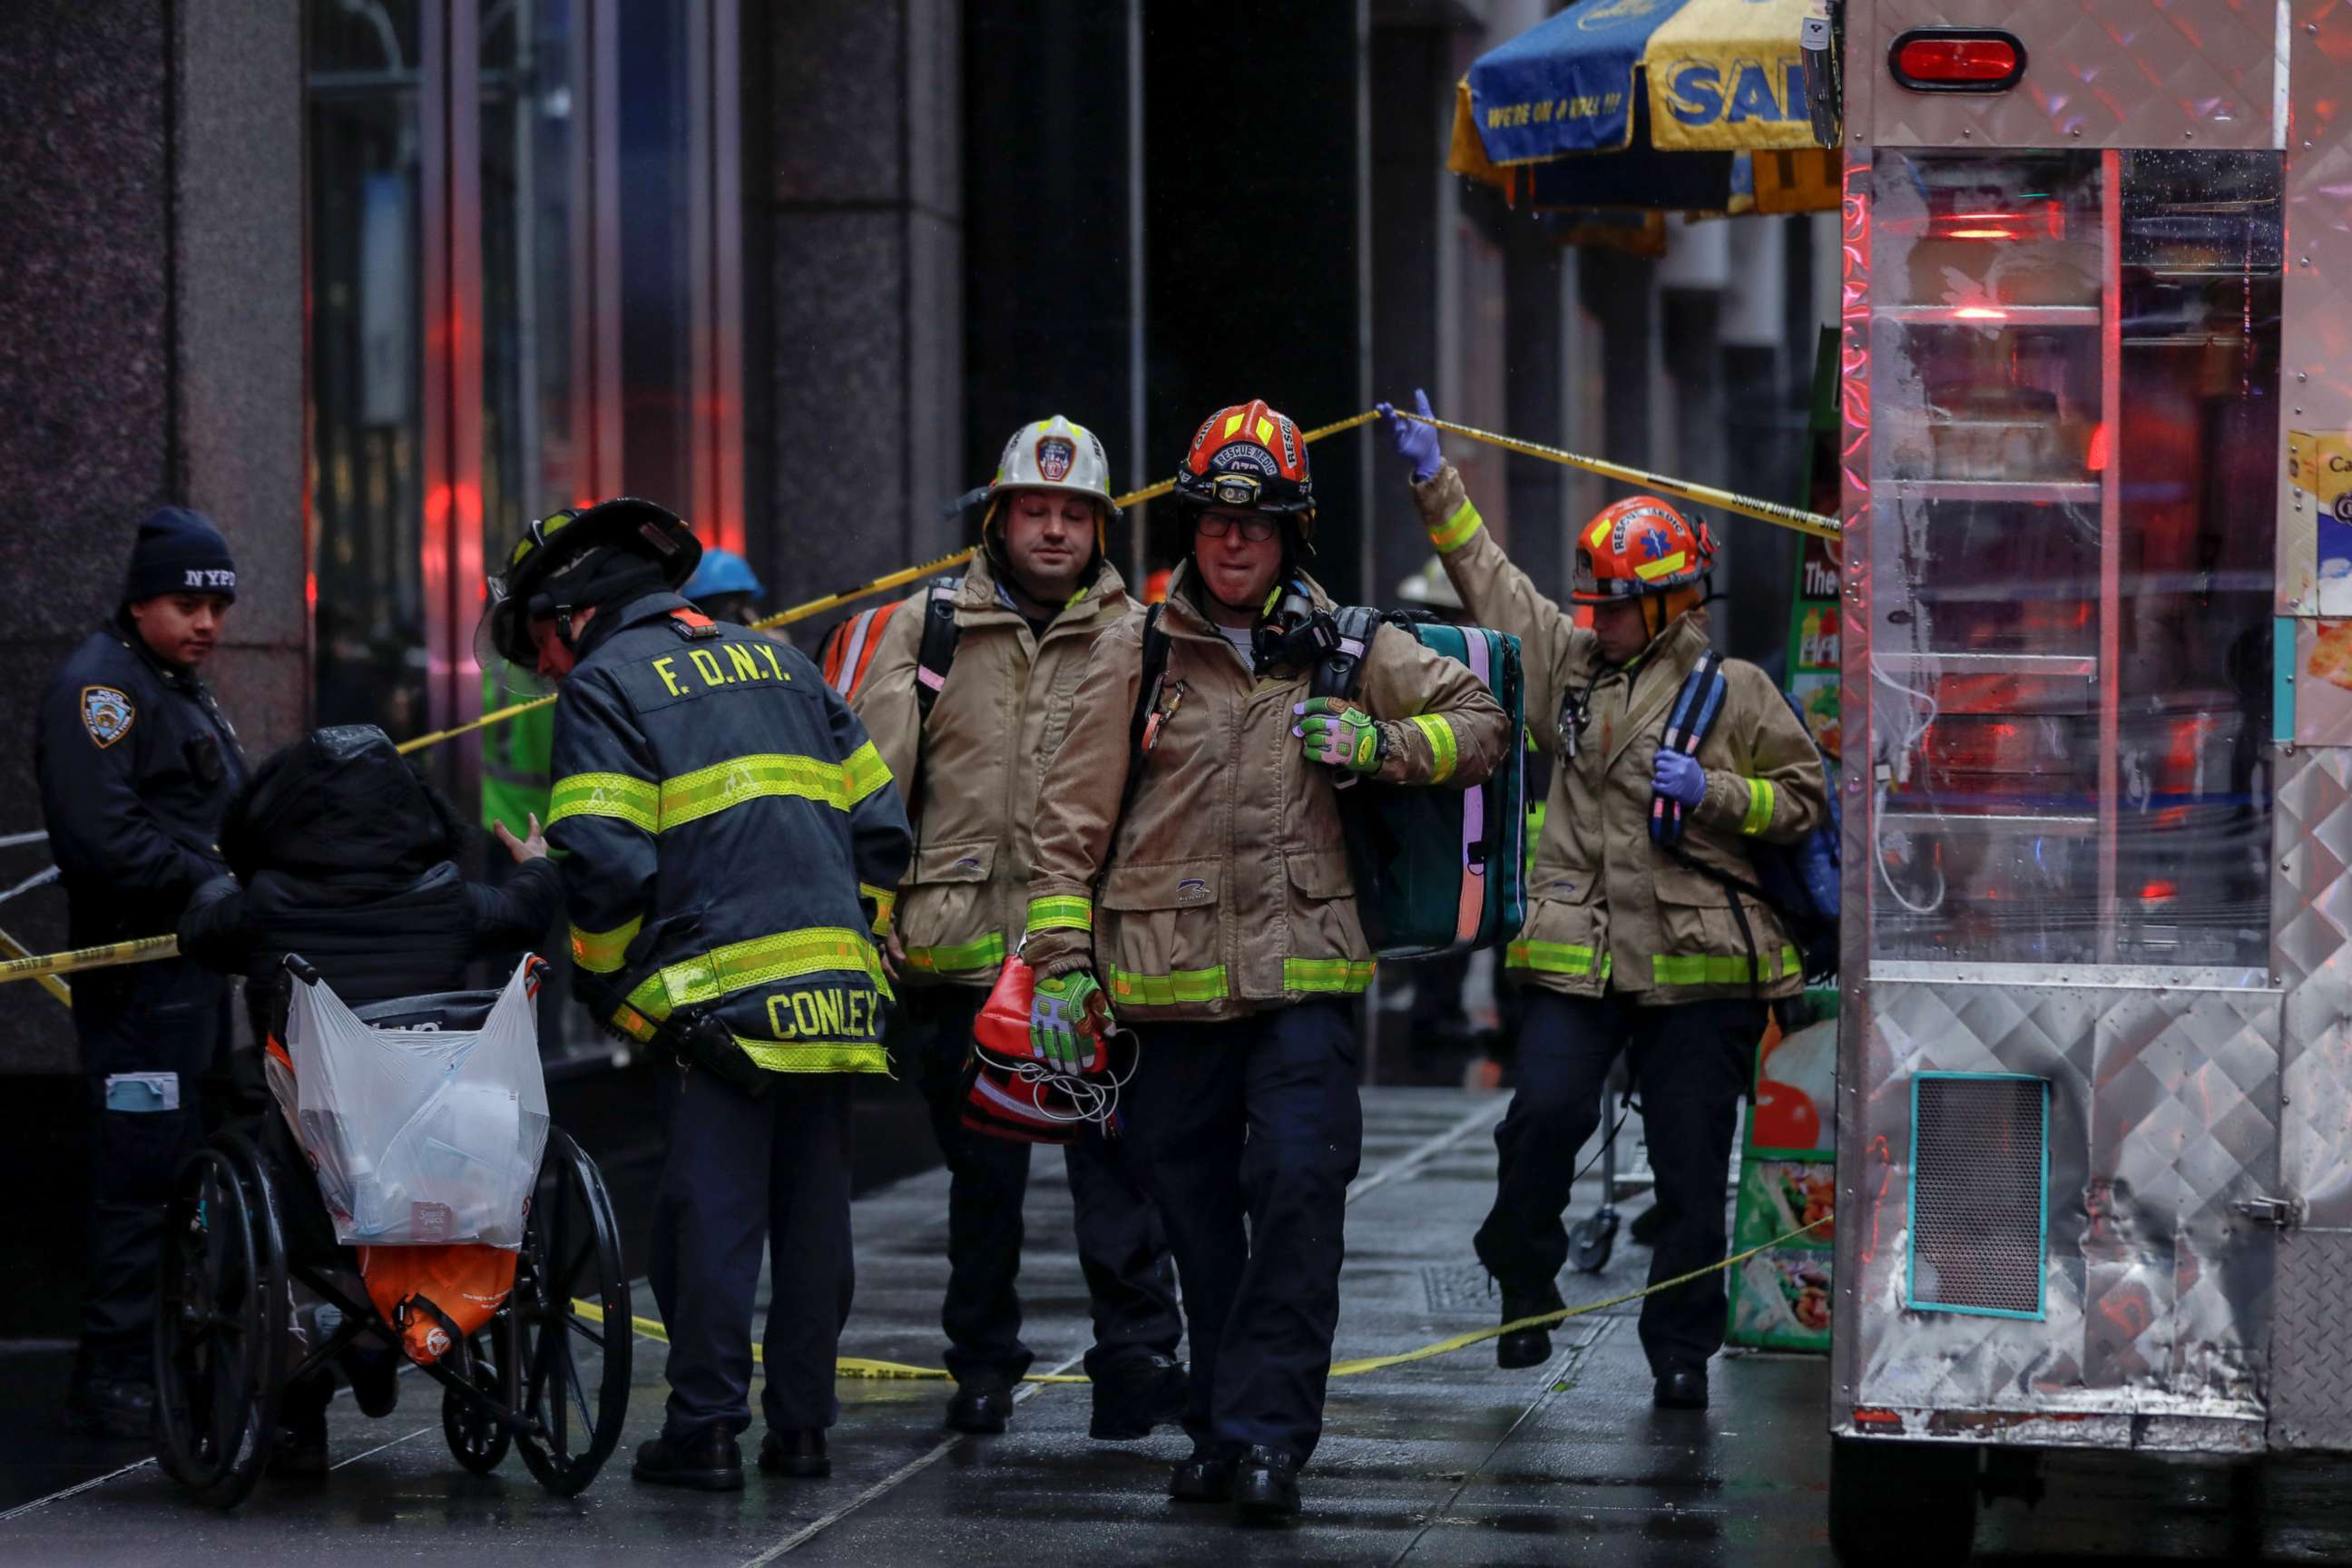 PHOTO: Fire department and police department personnel work at the scene after a woman was killed by falling debris near Times Square in New York, Dec. 17, 2019.